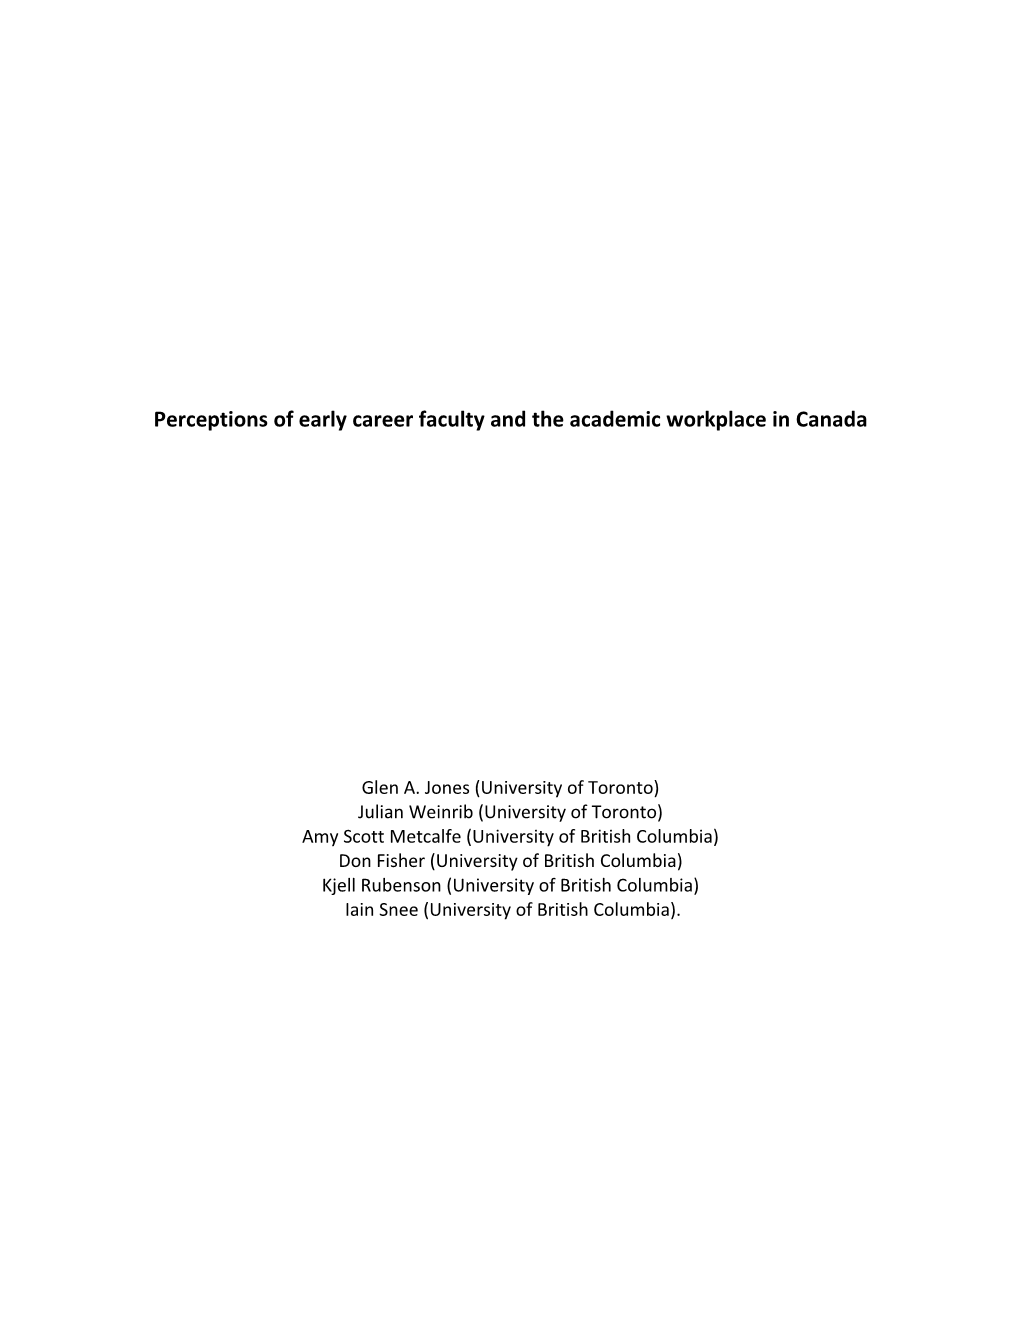 Perceptions of Early Career Faculty and the Context of Academic Work in Canada